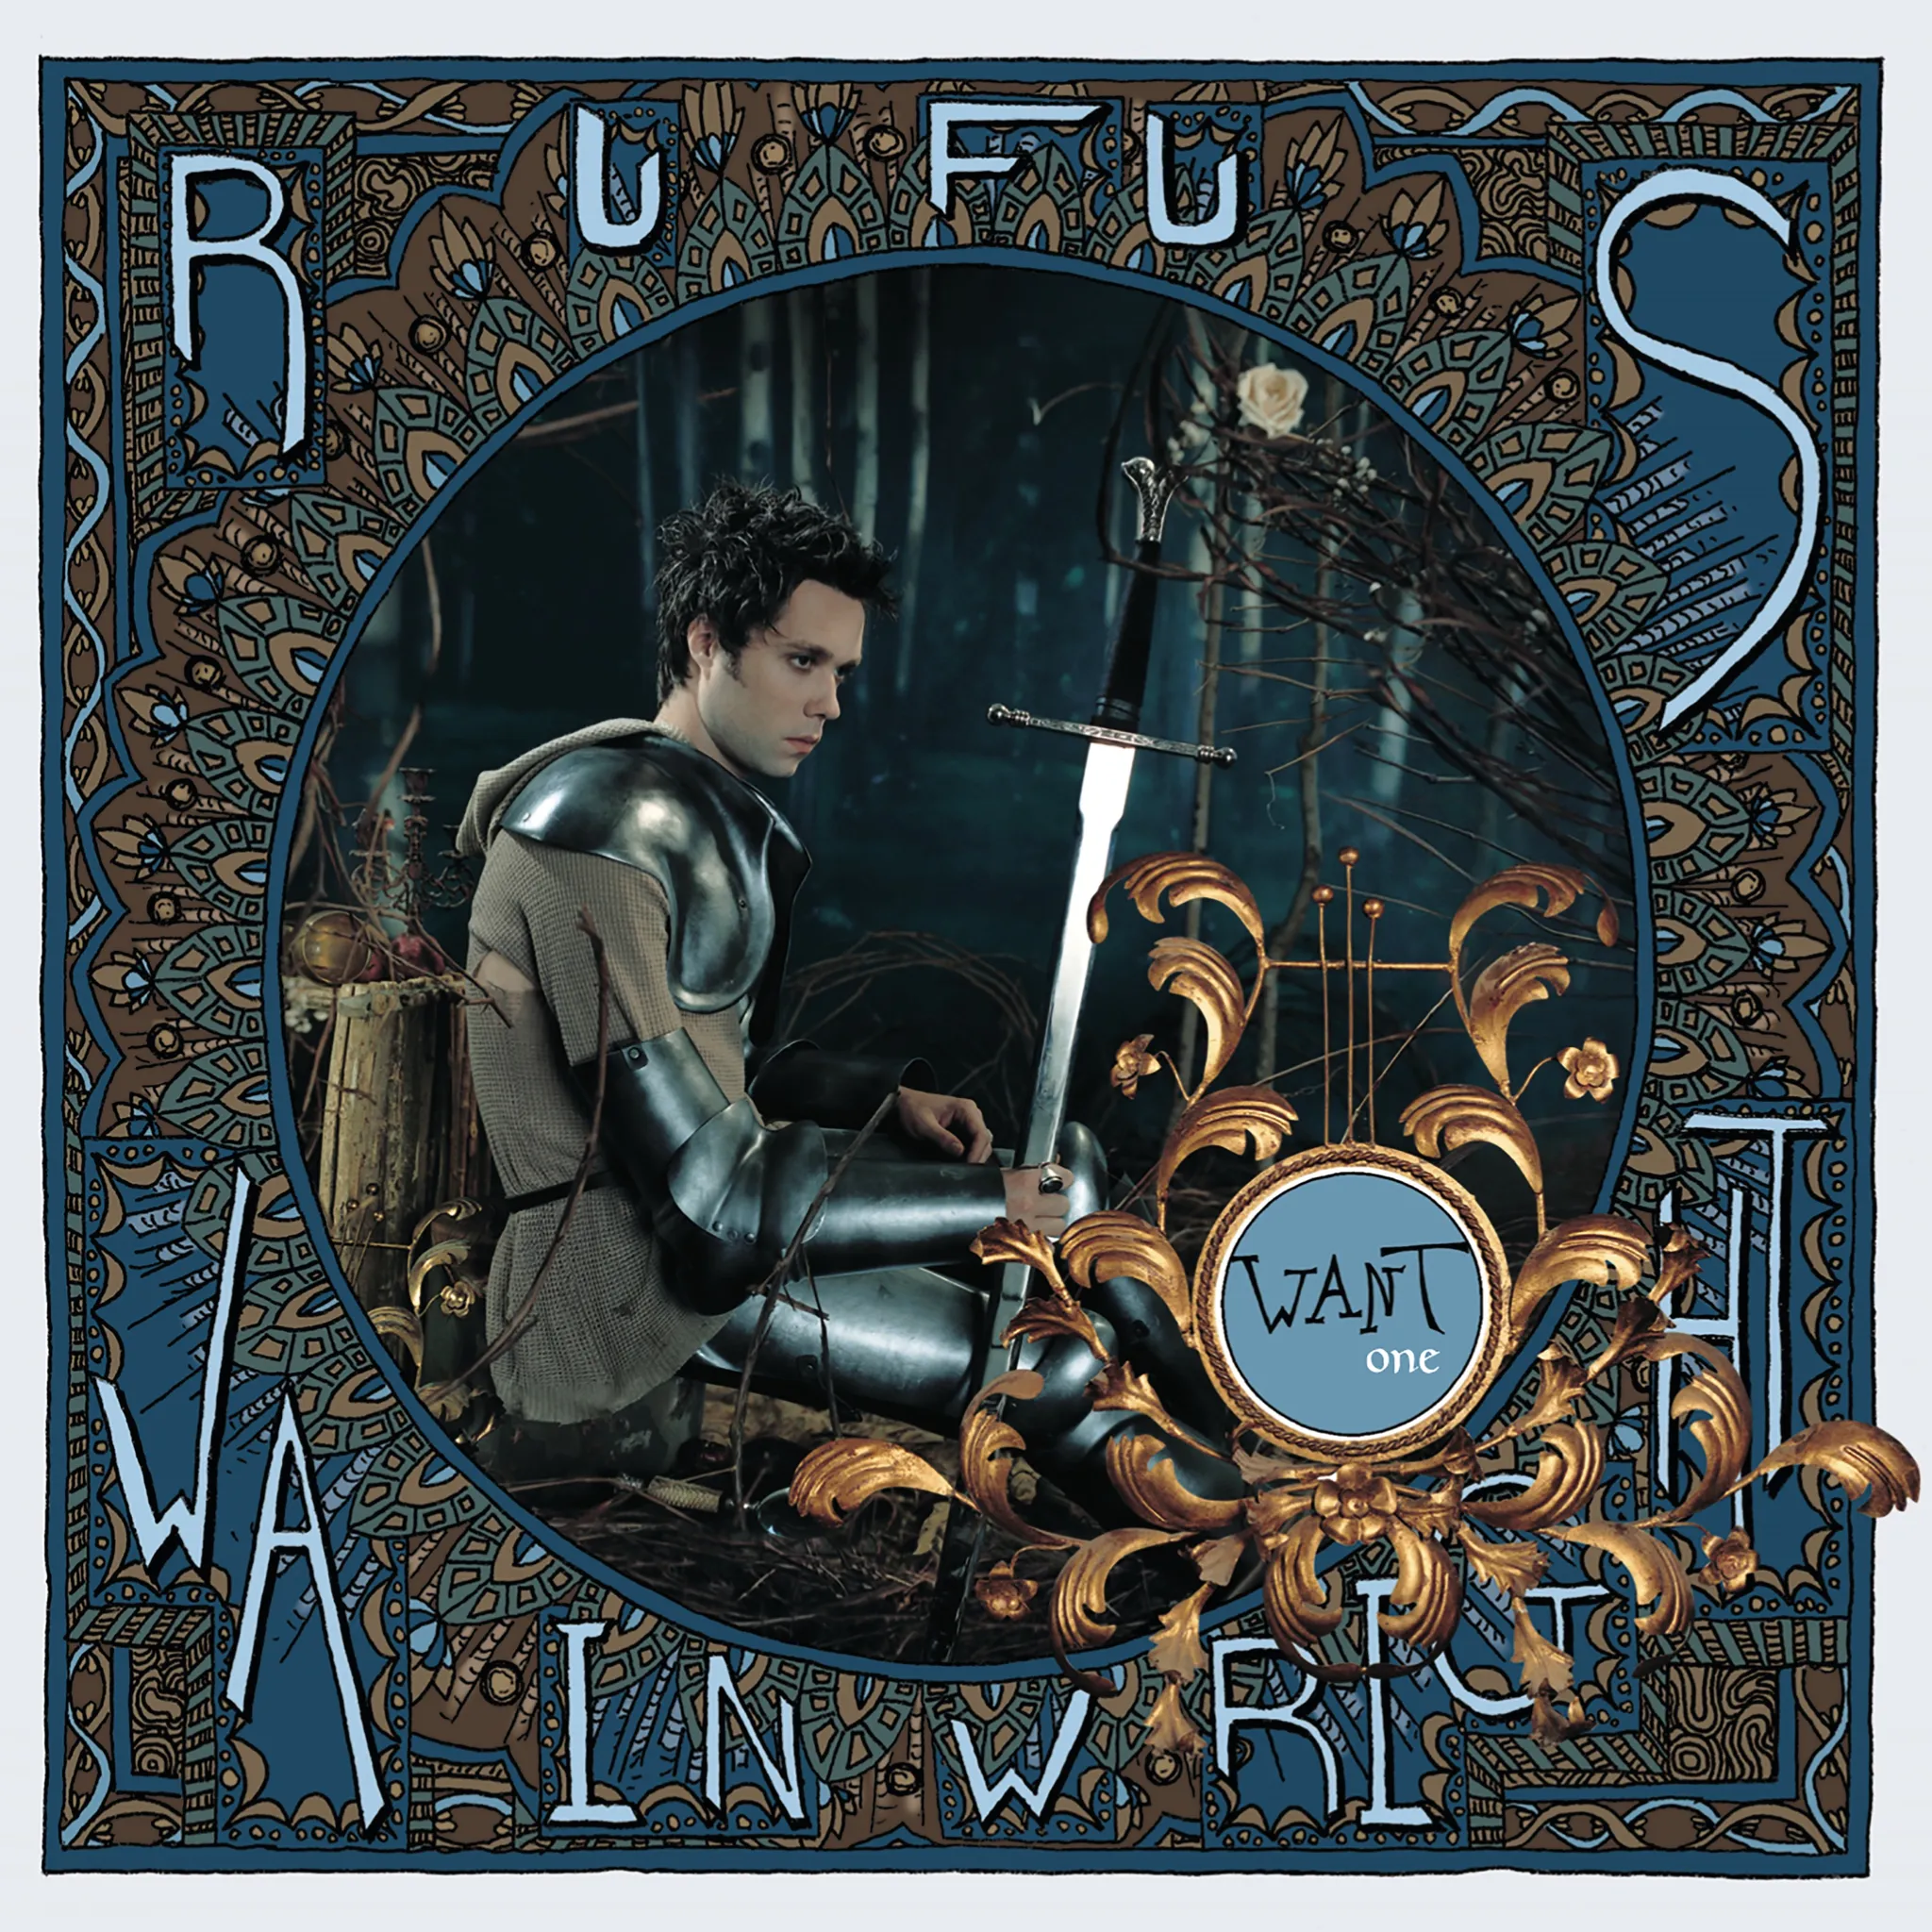 <strong>Rufus Wainwright - Want One</strong> (Vinyl LP - black)